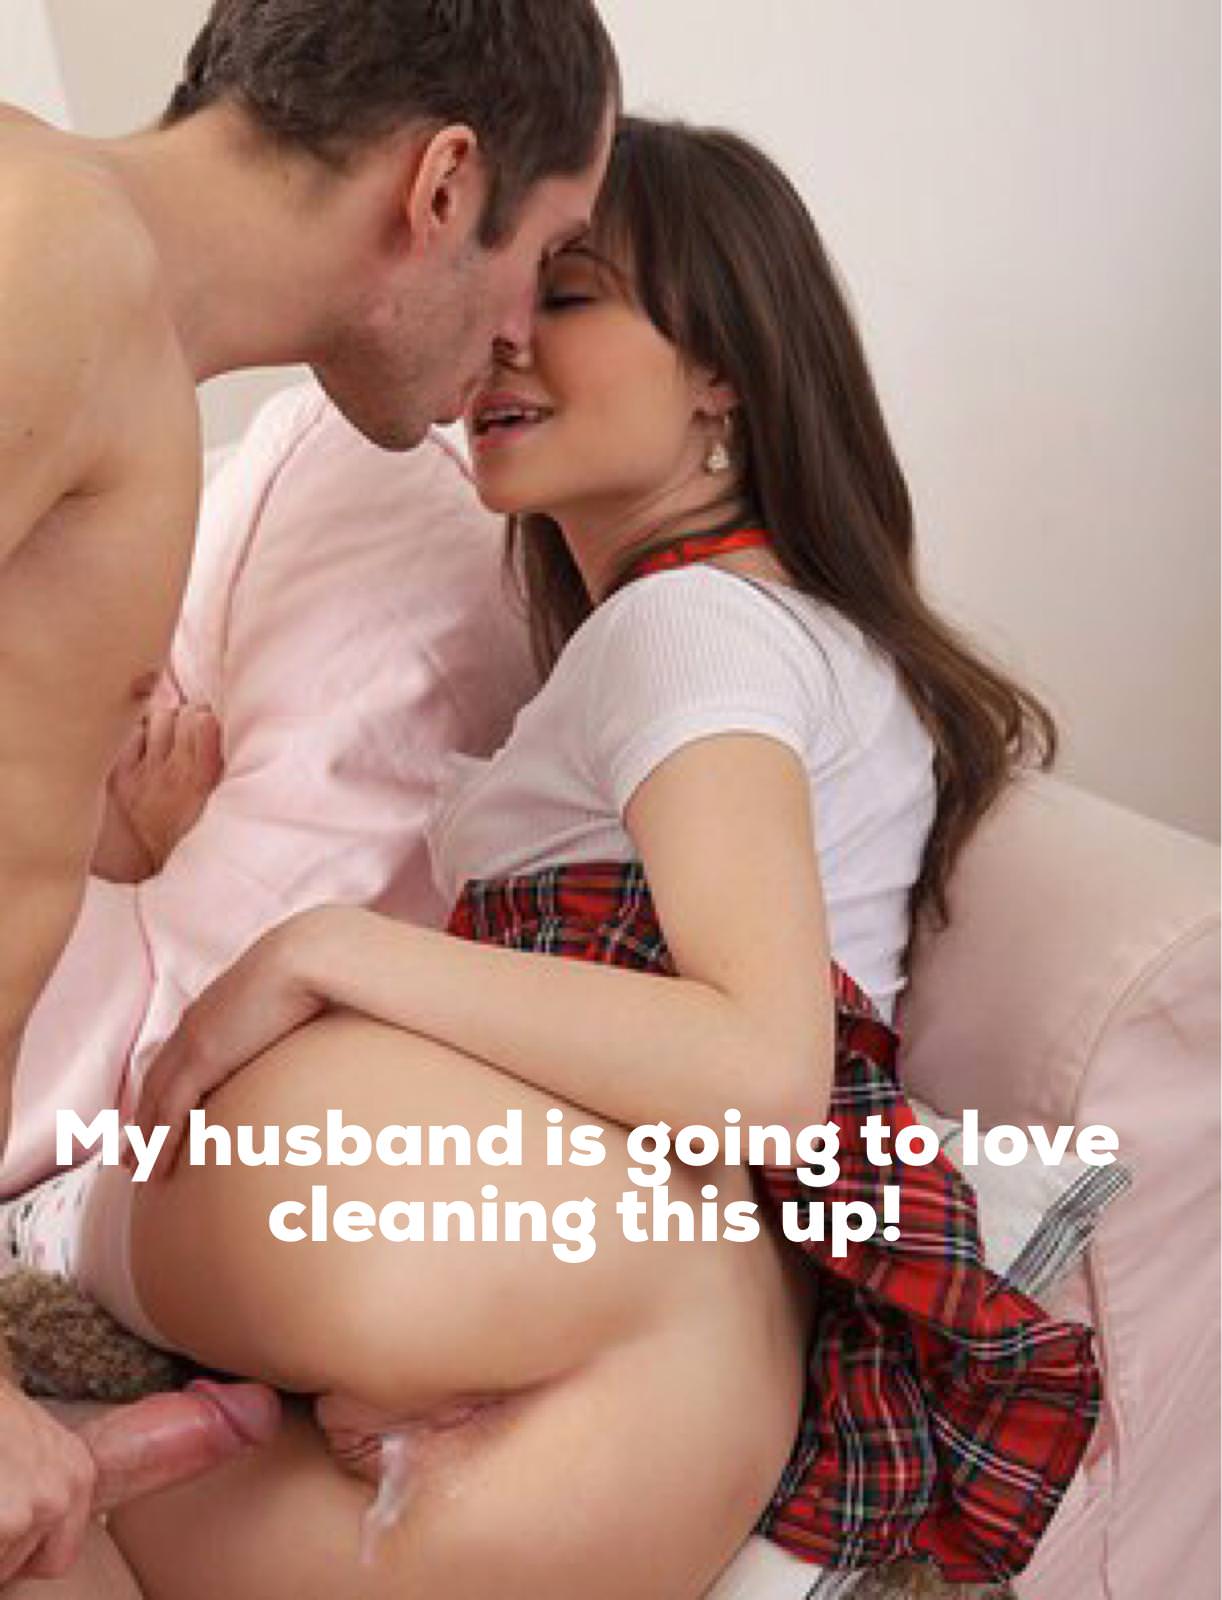 Cuckold Cleanup Caption